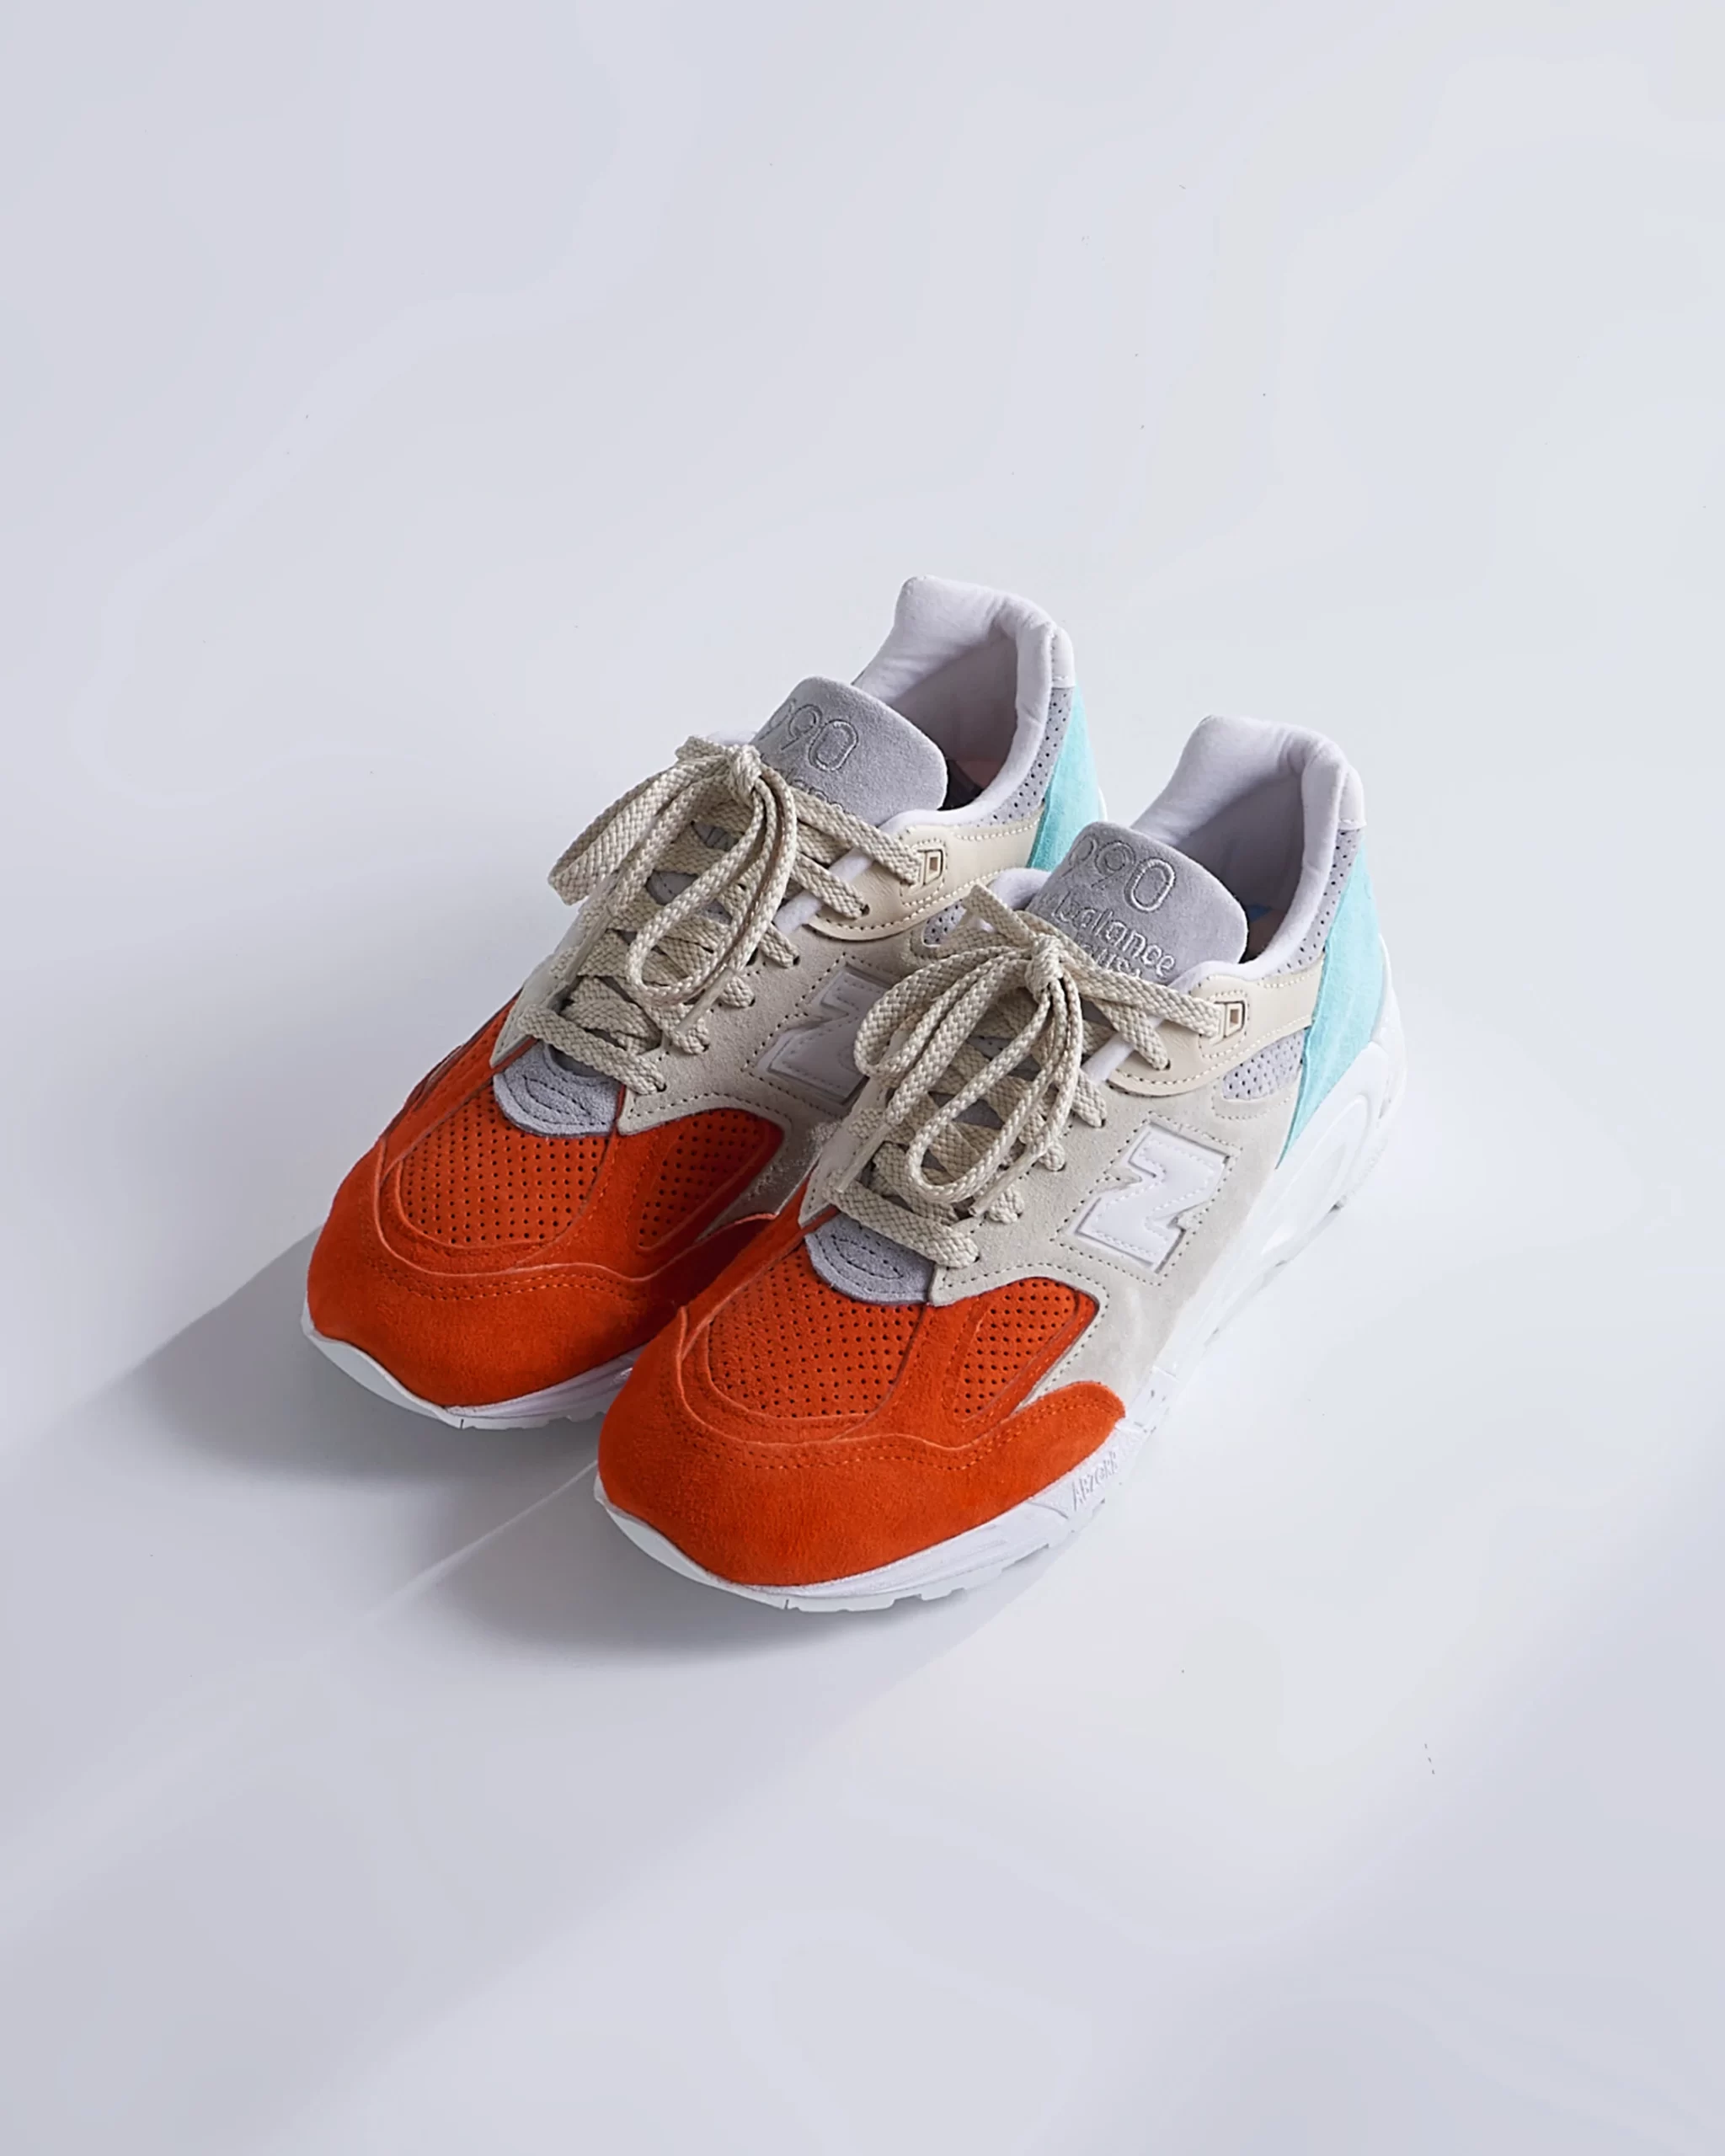 kith-ronnie-fieg-for-new-balance-990-anniversary-collection-release-20220615